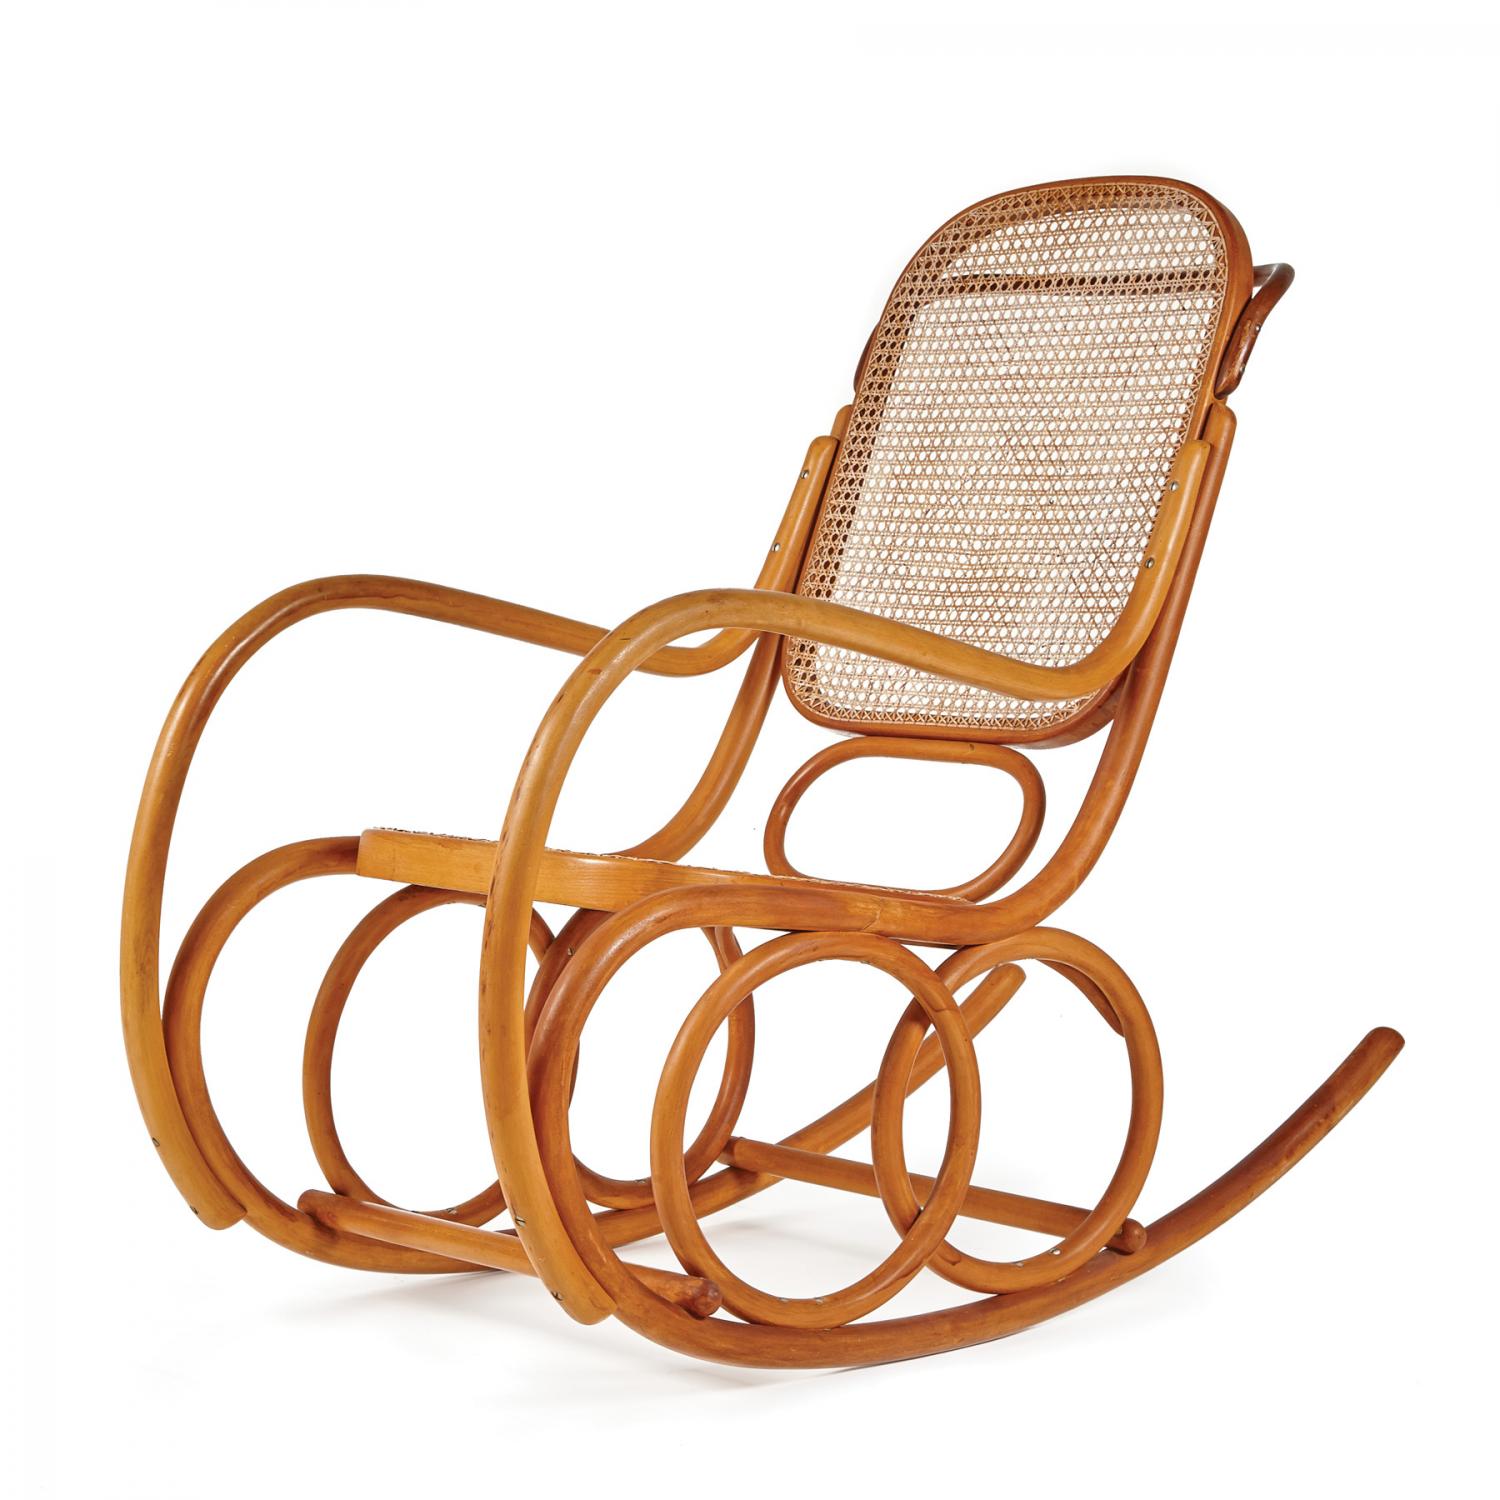 A Caned Bentwood Rocking Chair C. 1900 - Price Estimate: $500 - $700